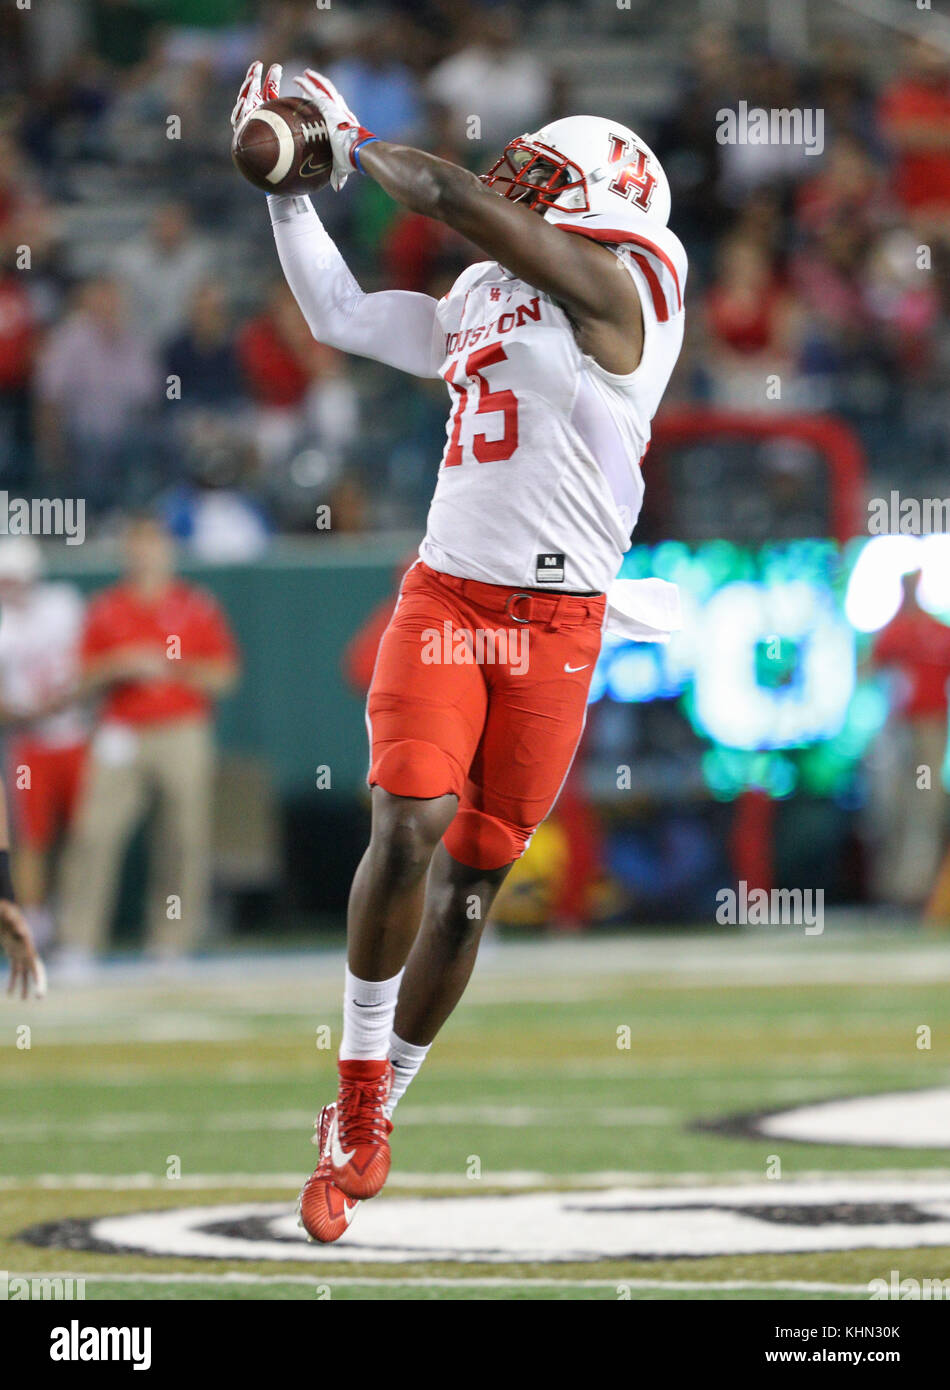 New Orleans, LA, USA. 18th Nov, 2017. Houston's Linell Bonner #15 snatches a pass from the air during the NCAA football game between the Tulane Green Wave and the Houston Cougars at Yulman Stadium in New Orleans, LA. Kyle Okita/CSM/Alamy Live News Stock Photo